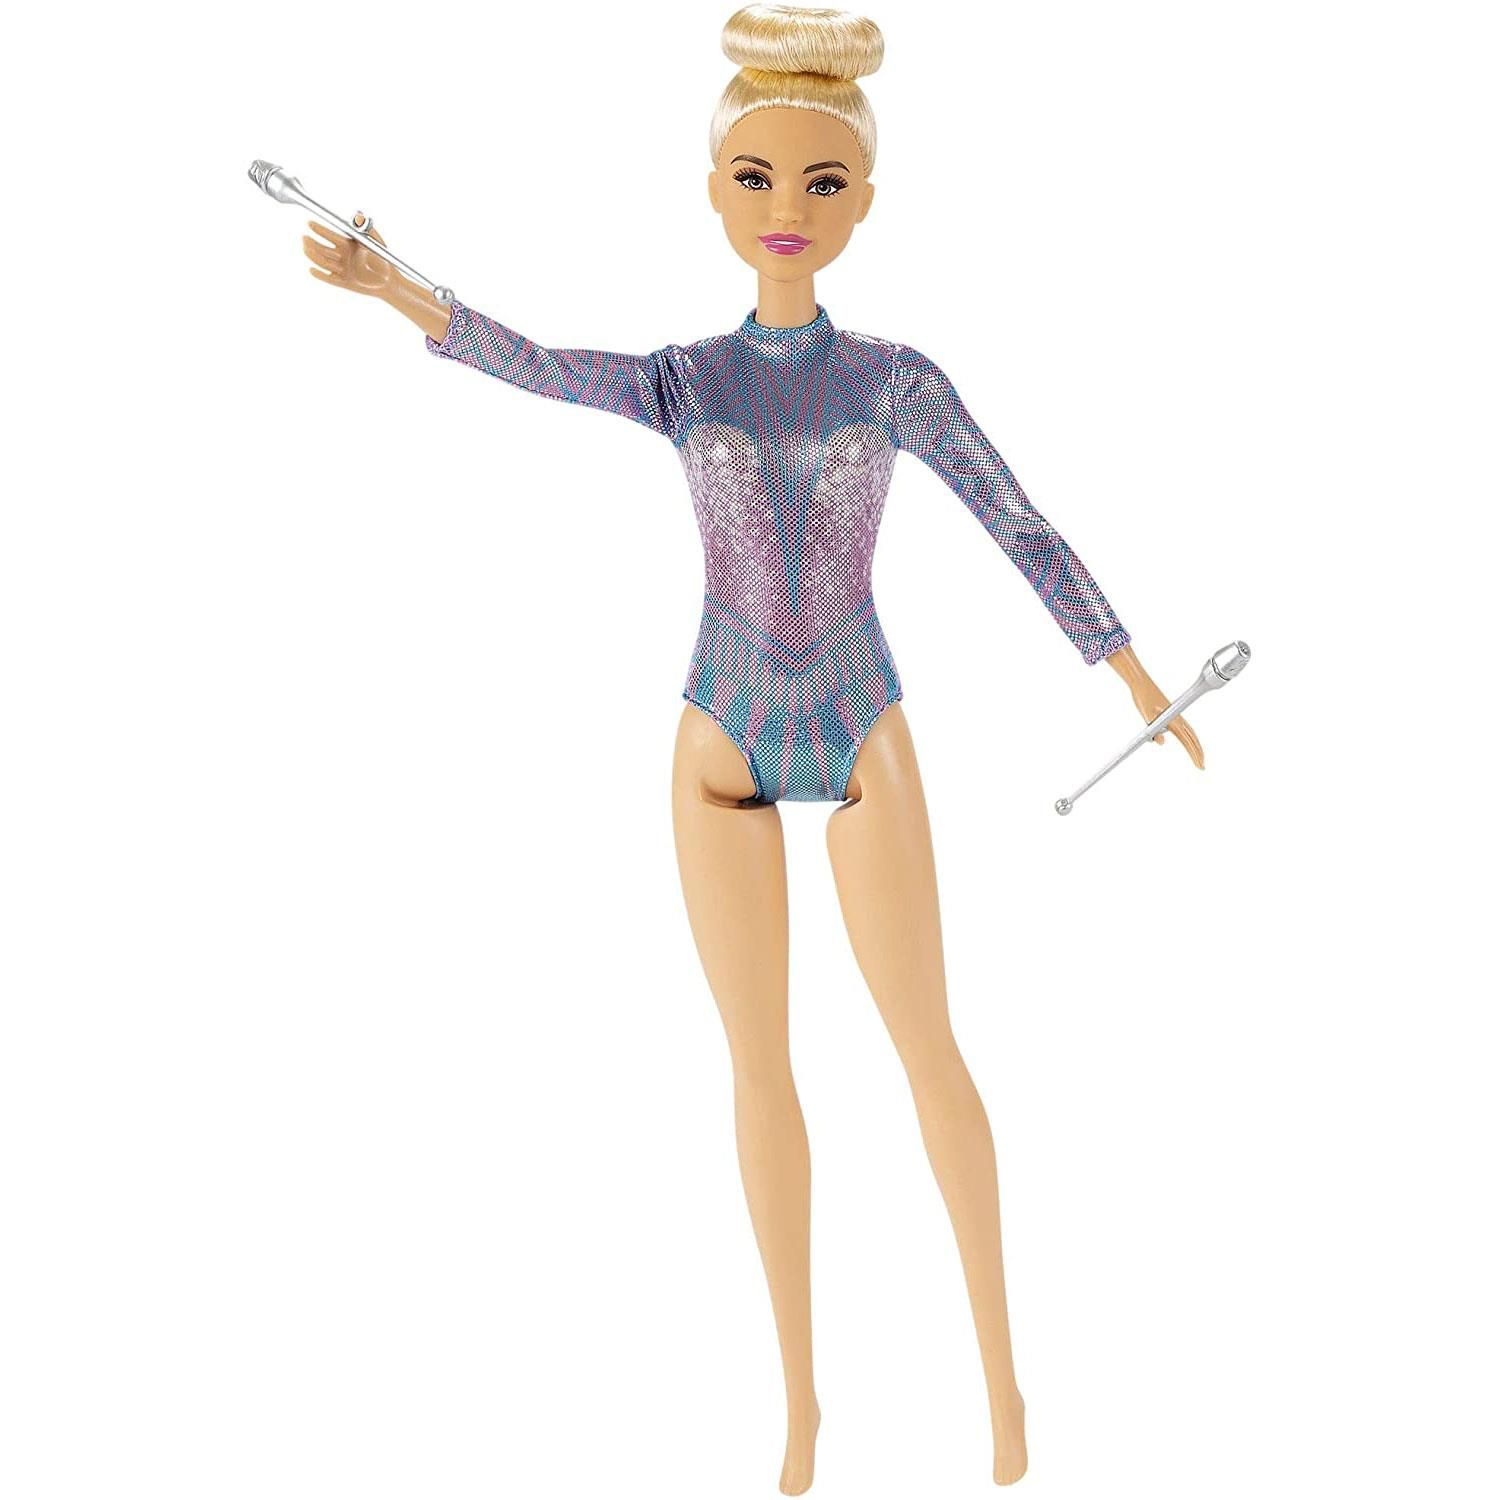 Barbie Fashionable & Fun Loving  Rhythmic Gymnast Doll with Accessories

Explore a world of gymnastic fun with the Barbie rhythmic gymnast doll! When a girl plays with Barbie, she imagines everything she can become, and if you love gymnastics and dance, you can be a rhythmic gymnast! The Barbie rhythmic gymnast doll (12-in/30.40-cm) wears a colourful metallic leotard and has a cute bun updo. She comes with two clubs and a ribbon she can hold for performing her gymnast moves. Kids will love the endless possibilities for creative expression and storytelling fun. Doll cannot stand alone. Colours and decorations may vary. Makes a great gift for ages 3 years old and up.

Features:

Explore gymnastics and dance fun with the Barbie rhythmic gymnast doll and related accessories!
Wearing a colourful metallic leotard and cute bun updo, Barbie rhythmic gymnast doll (12-in/30.40-cm) is ready to perform rhythmic gymnast moves!
Barbie rhythmic gymnast doll can hold the batons and ribbon for exciting, realistic performances and play.
Explore a world of creative storytelling fun with the Barbie rhythmic gymnast doll!
Makes a great gift for kids 3 years old and up, especially those interested in rhythmic gymnastics, dance and fitness!


Specifications:

Toy Type: Barbie Rhythmic Gymnast Doll
Material: Abs Material
Colour: Multicolour

Box Contains:

1x Barbie rhythmic gymnast doll
2x Batons
2x Ribbon